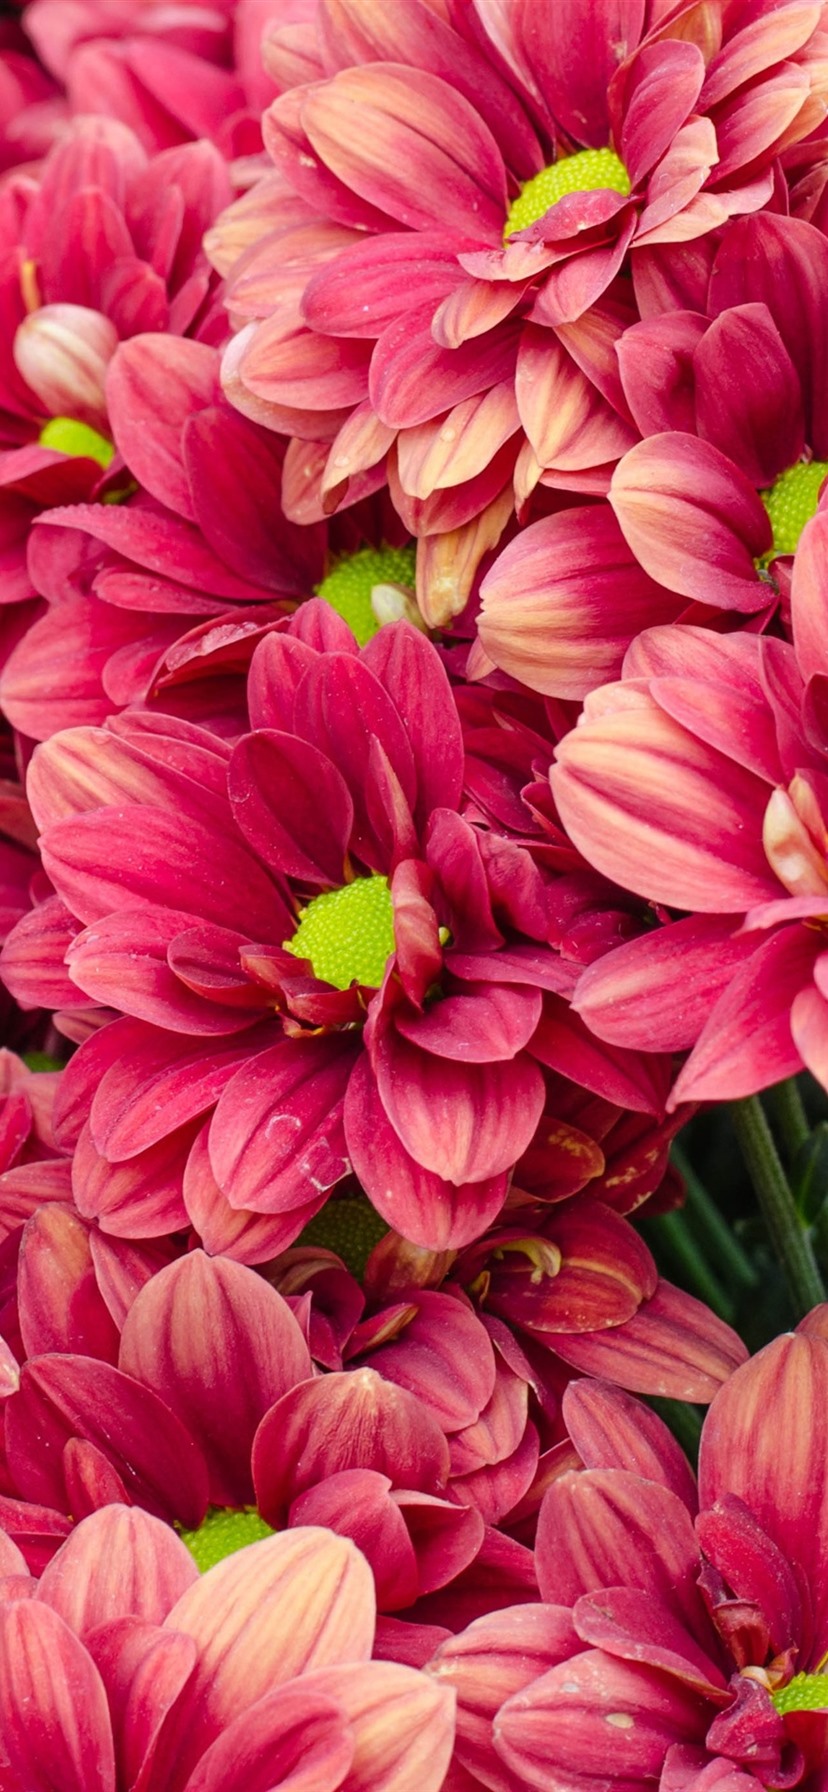 Many Red Chrysanthemum, Flowers 1125x2436 IPhone 11 Pro XS X Wallpaper, Background, Picture, Image